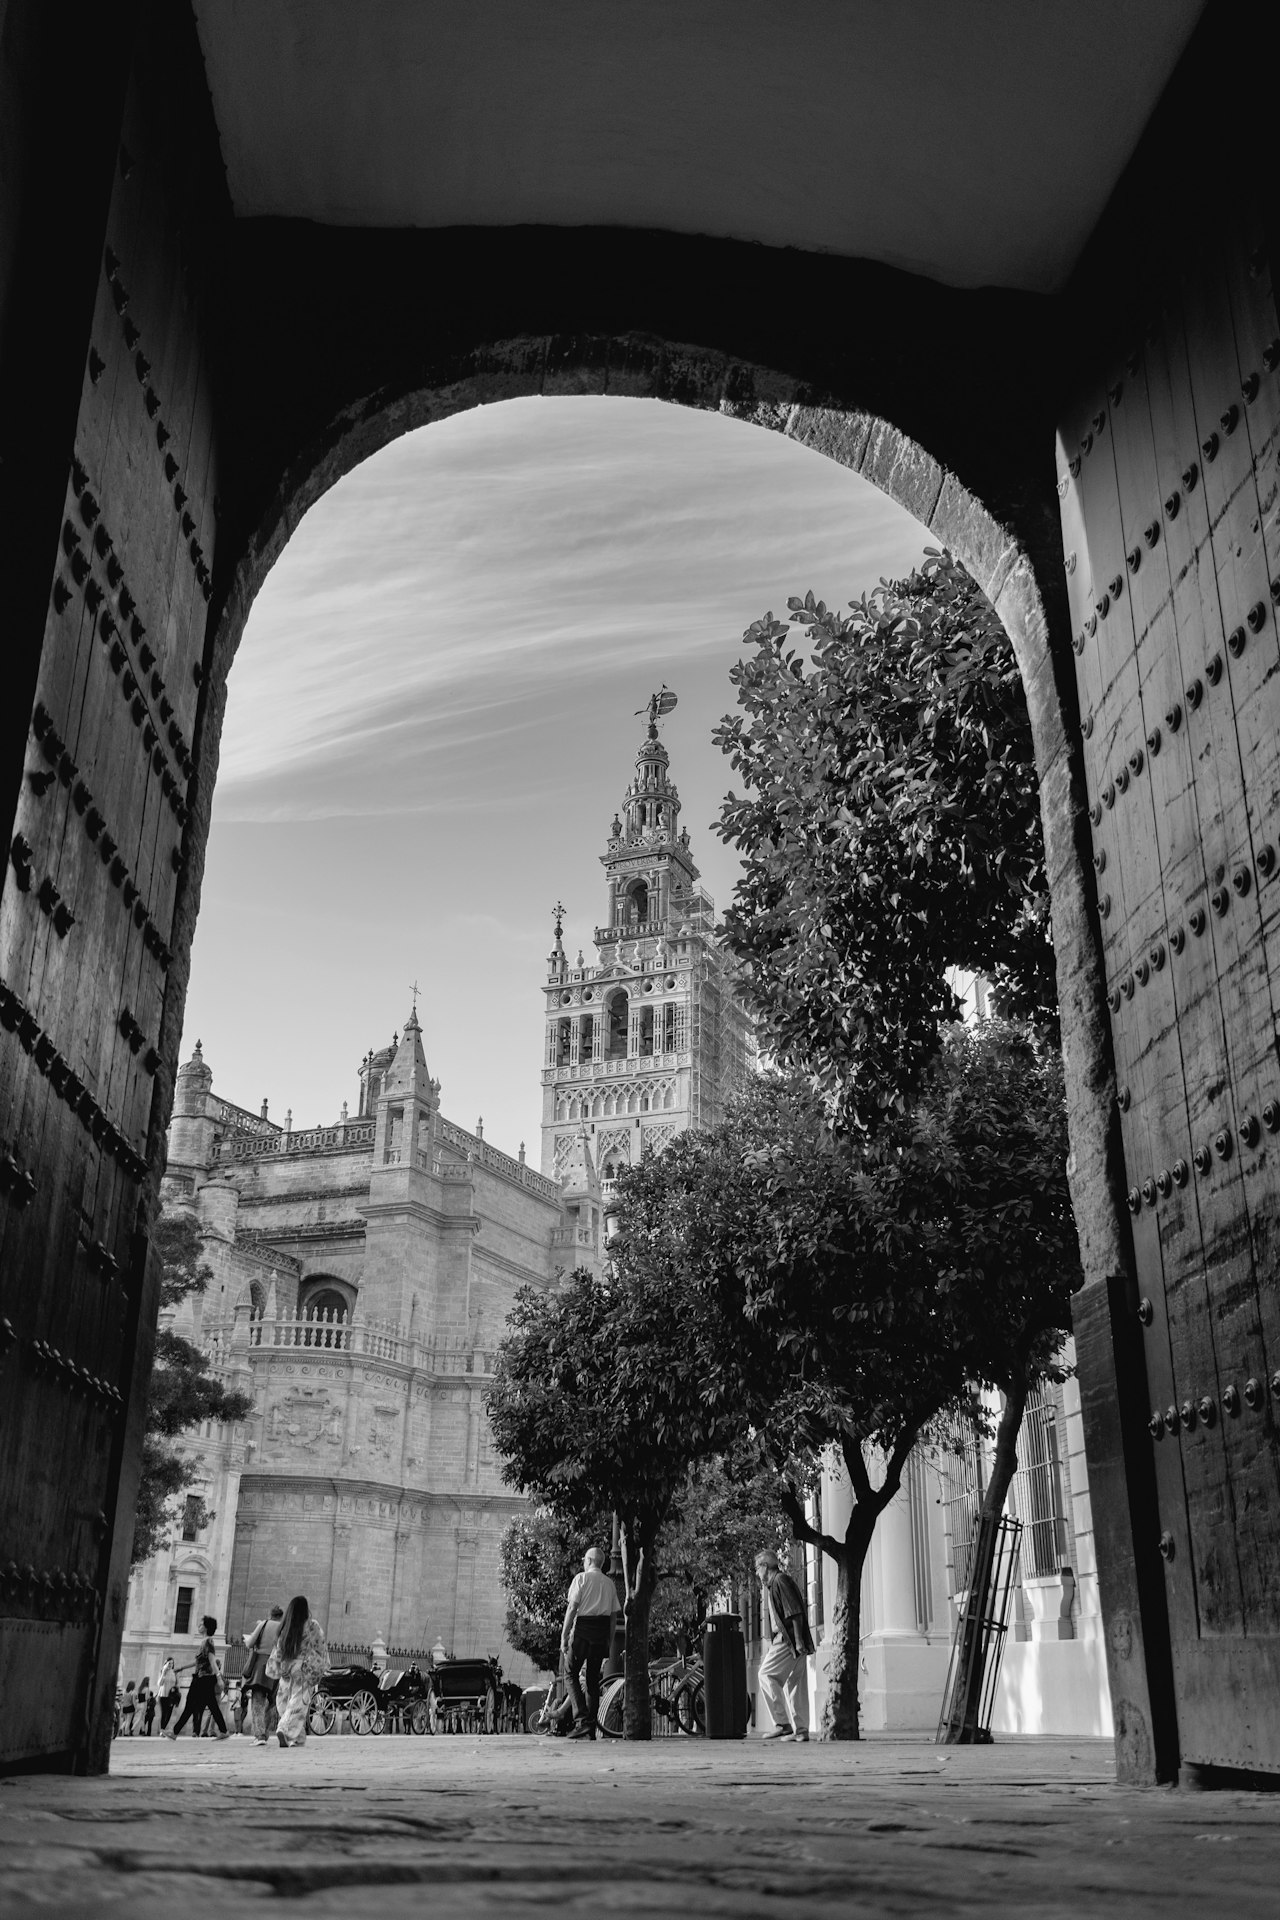 Seville cathedral people, trees, tunnel, and buildings during day